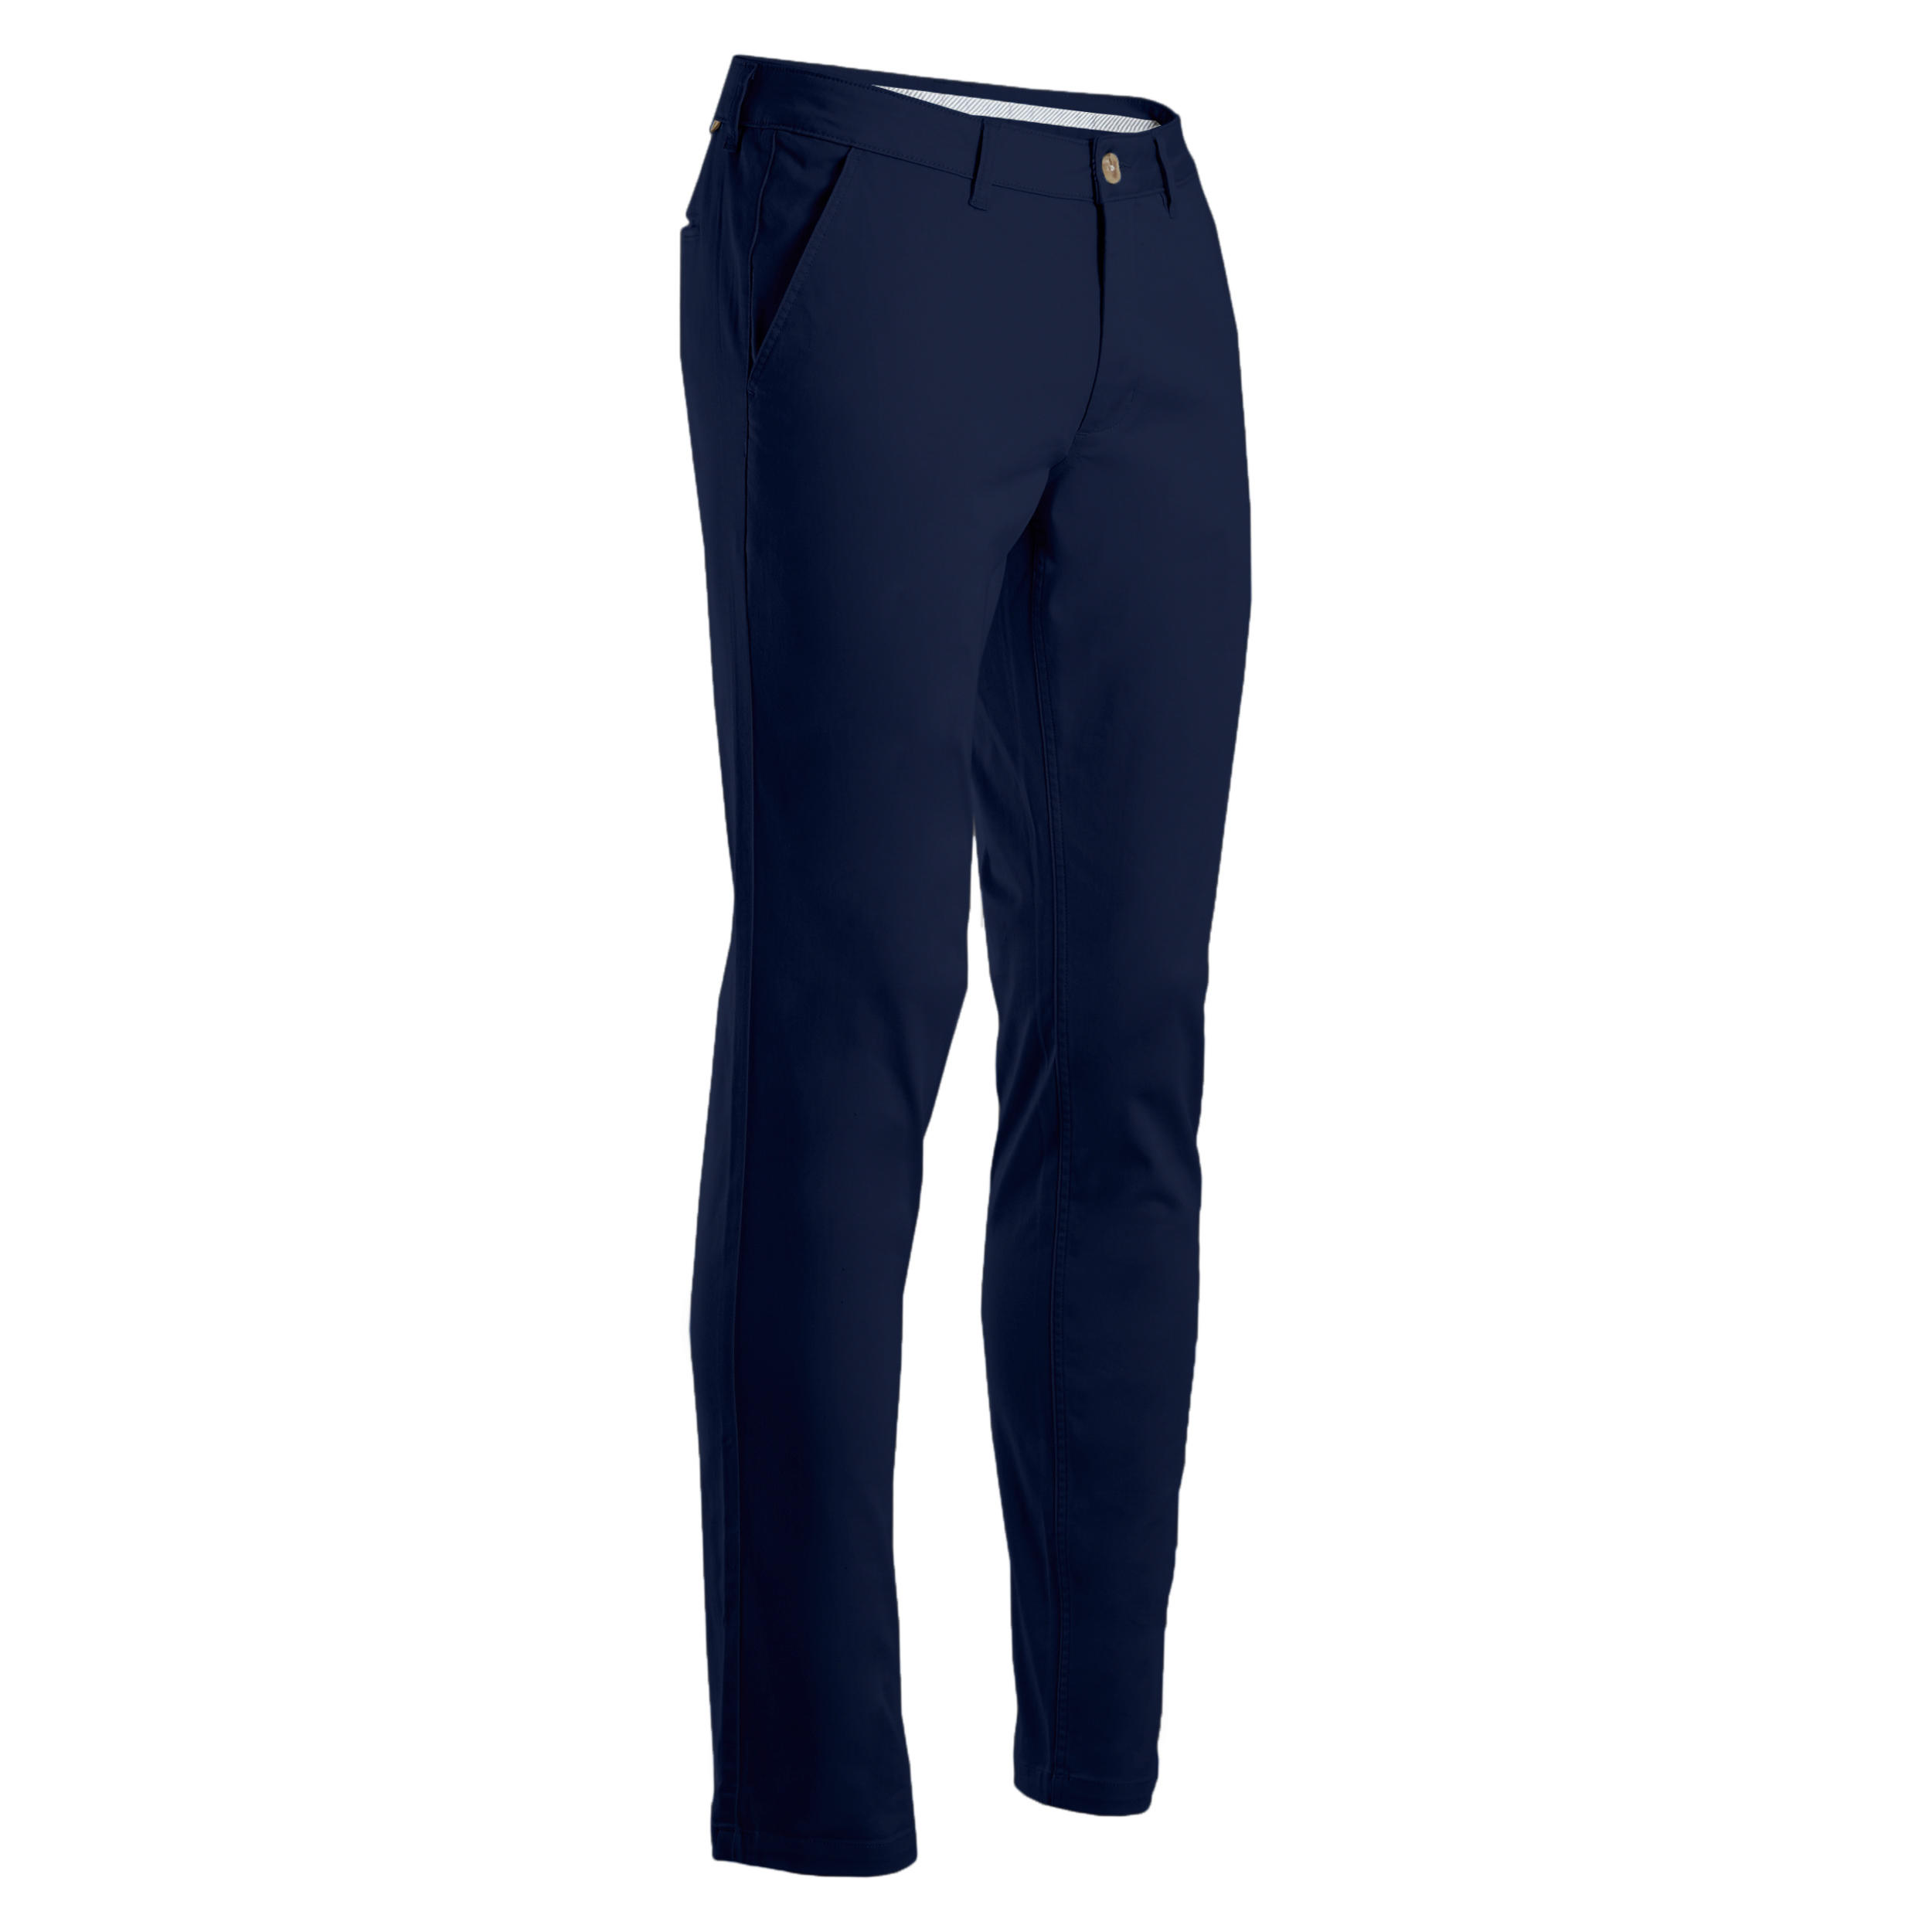 Tailored Track Navy Blue Golf Pants